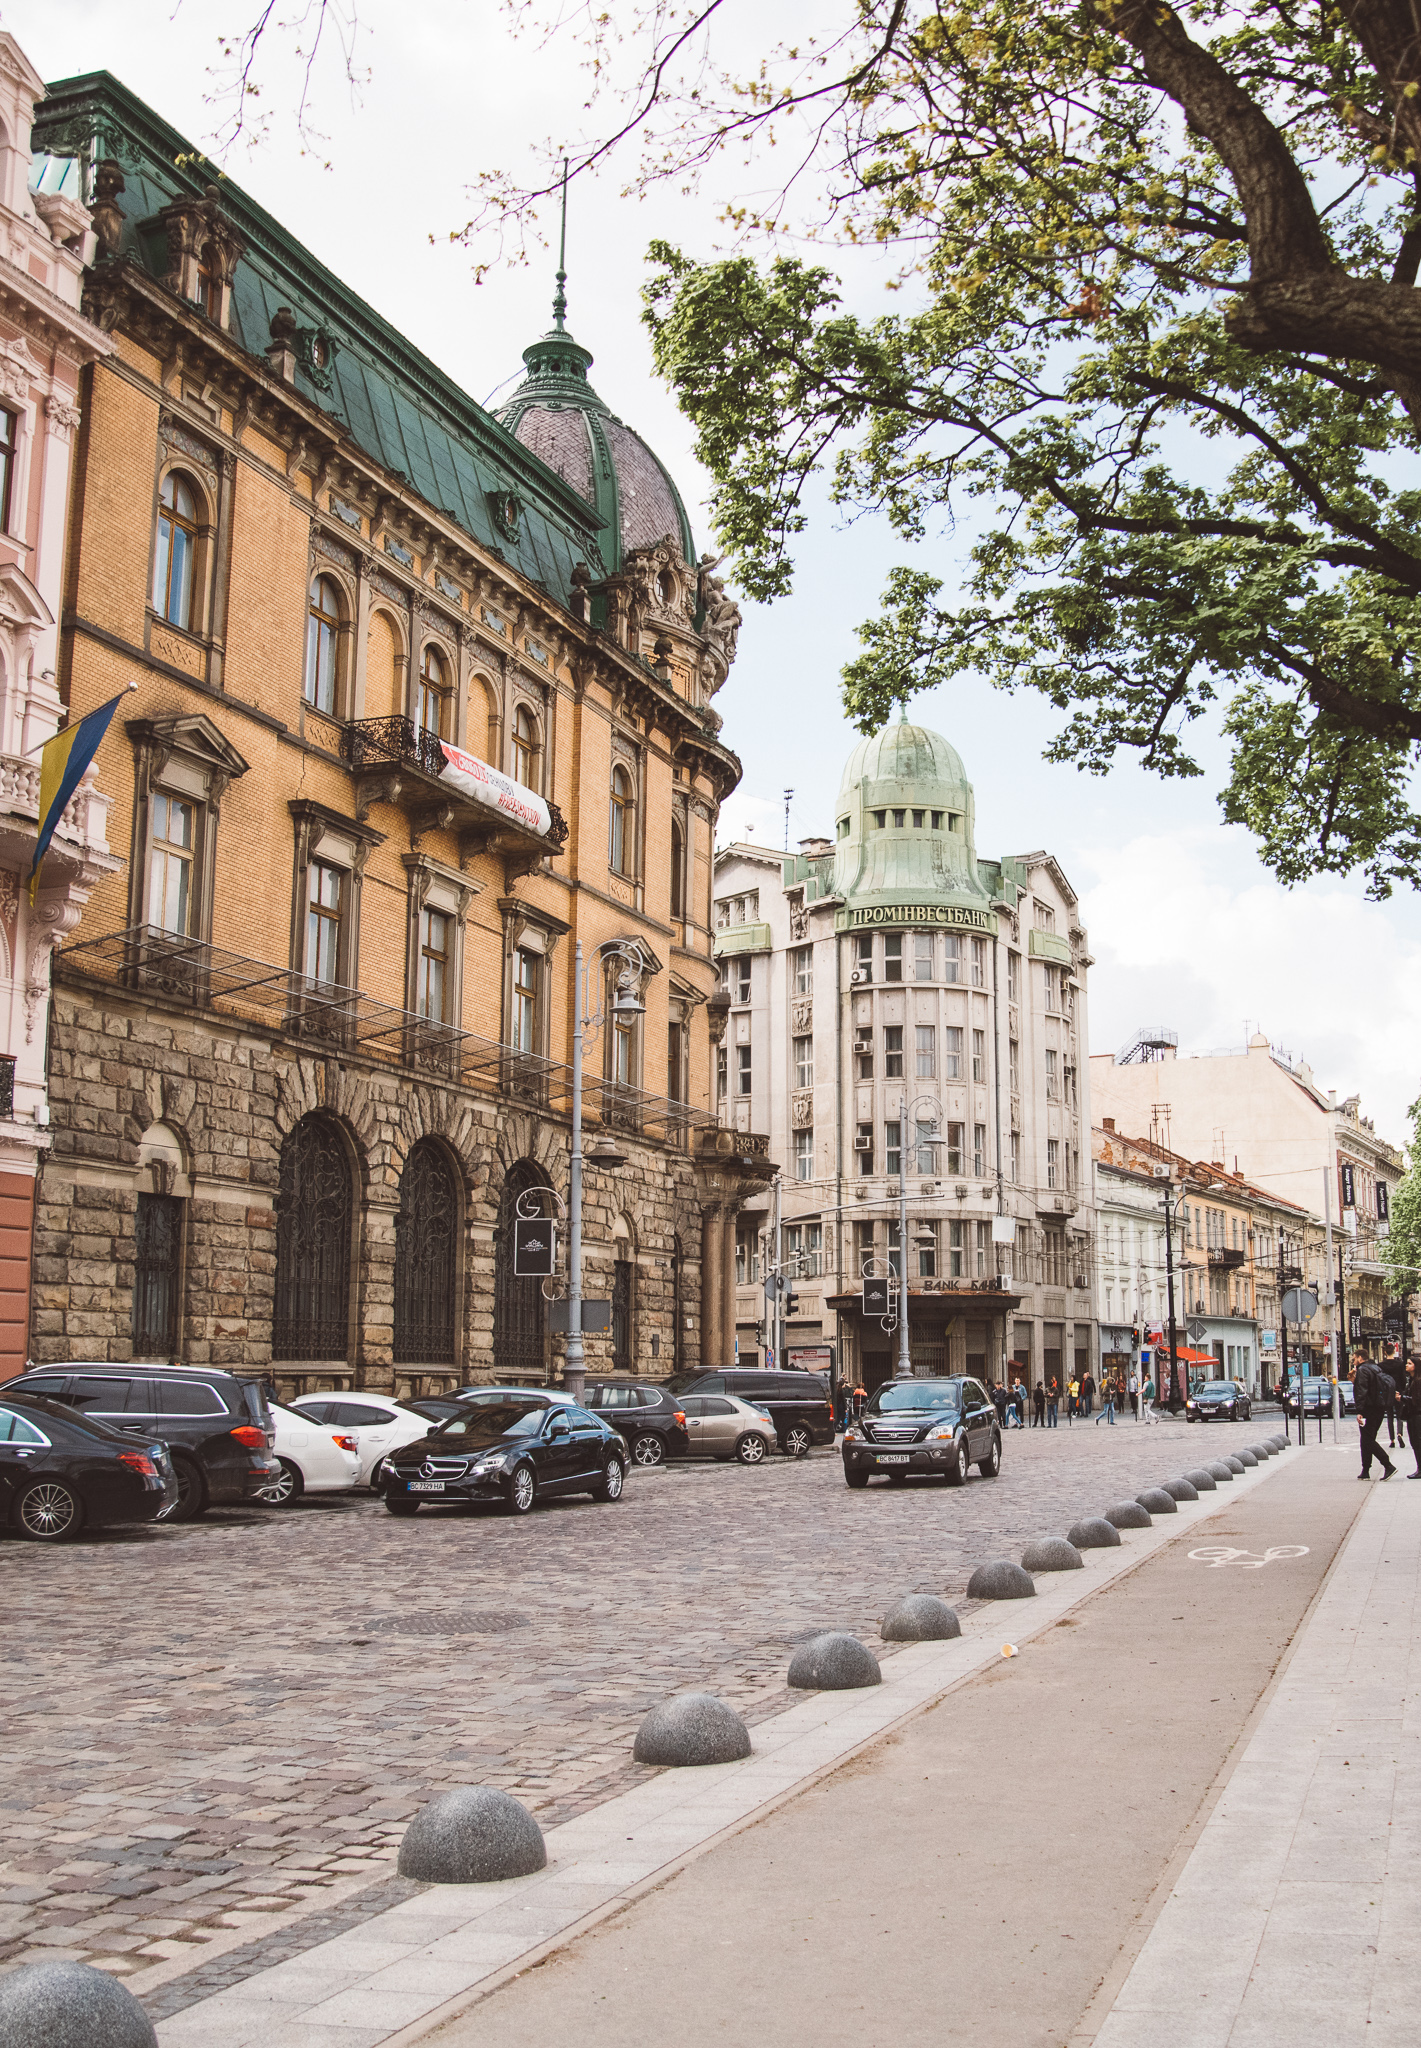 How to Spend 24 Hours in Lviv